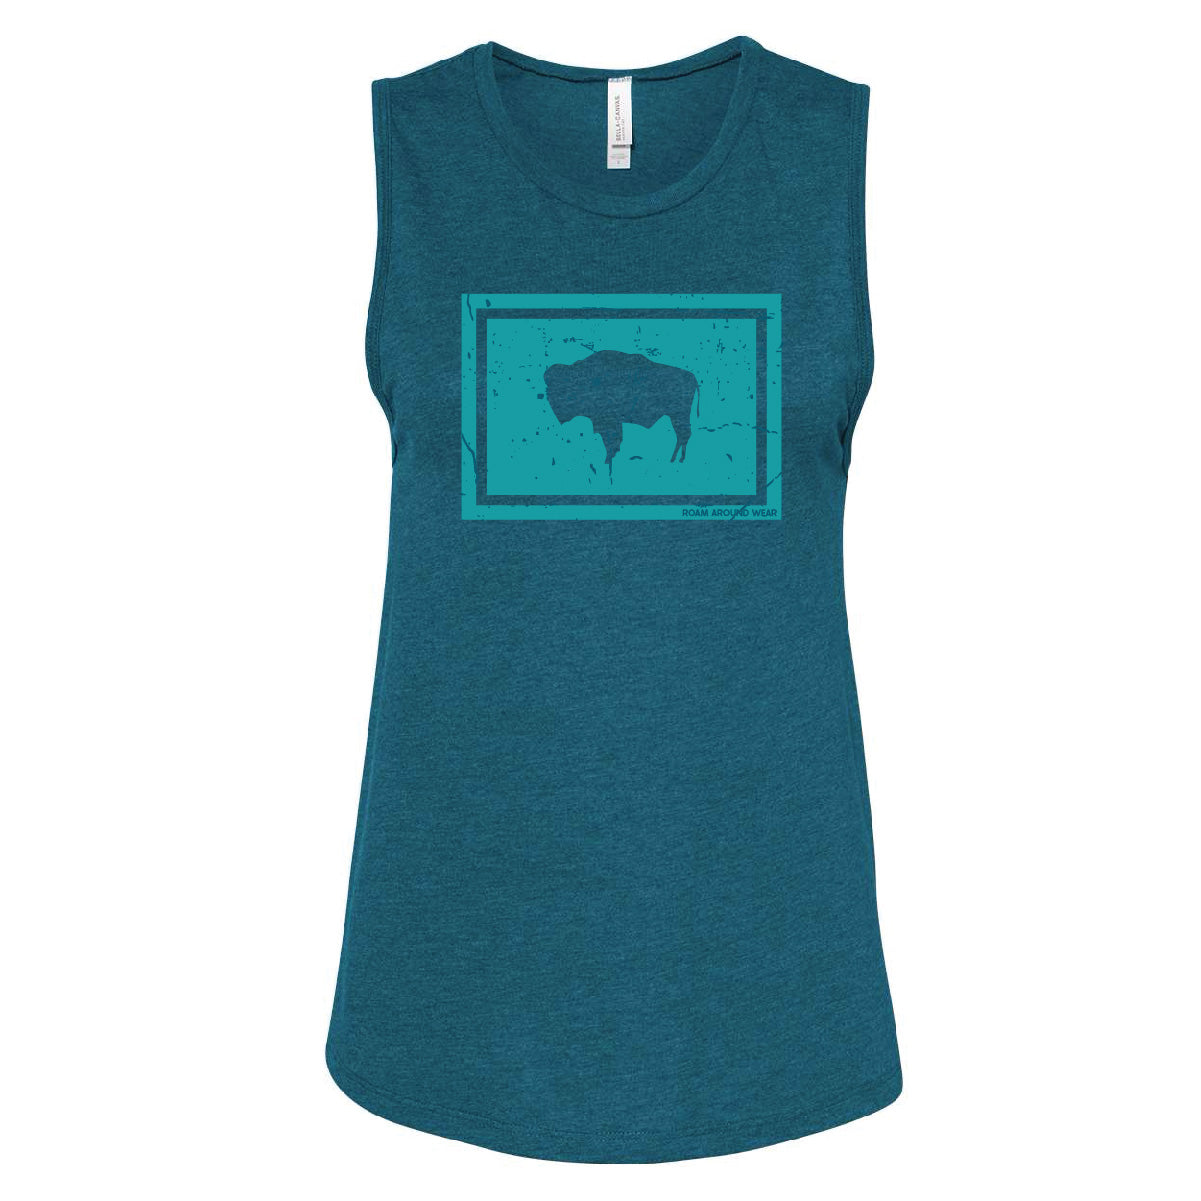 Summer tank. Wyoming bison tee. Western bison t-shirt. Women's tank. Women's teal tank with teal bison. Roam Around Wear is a Wyoming t-shirt company based in Gillette, Wyoming